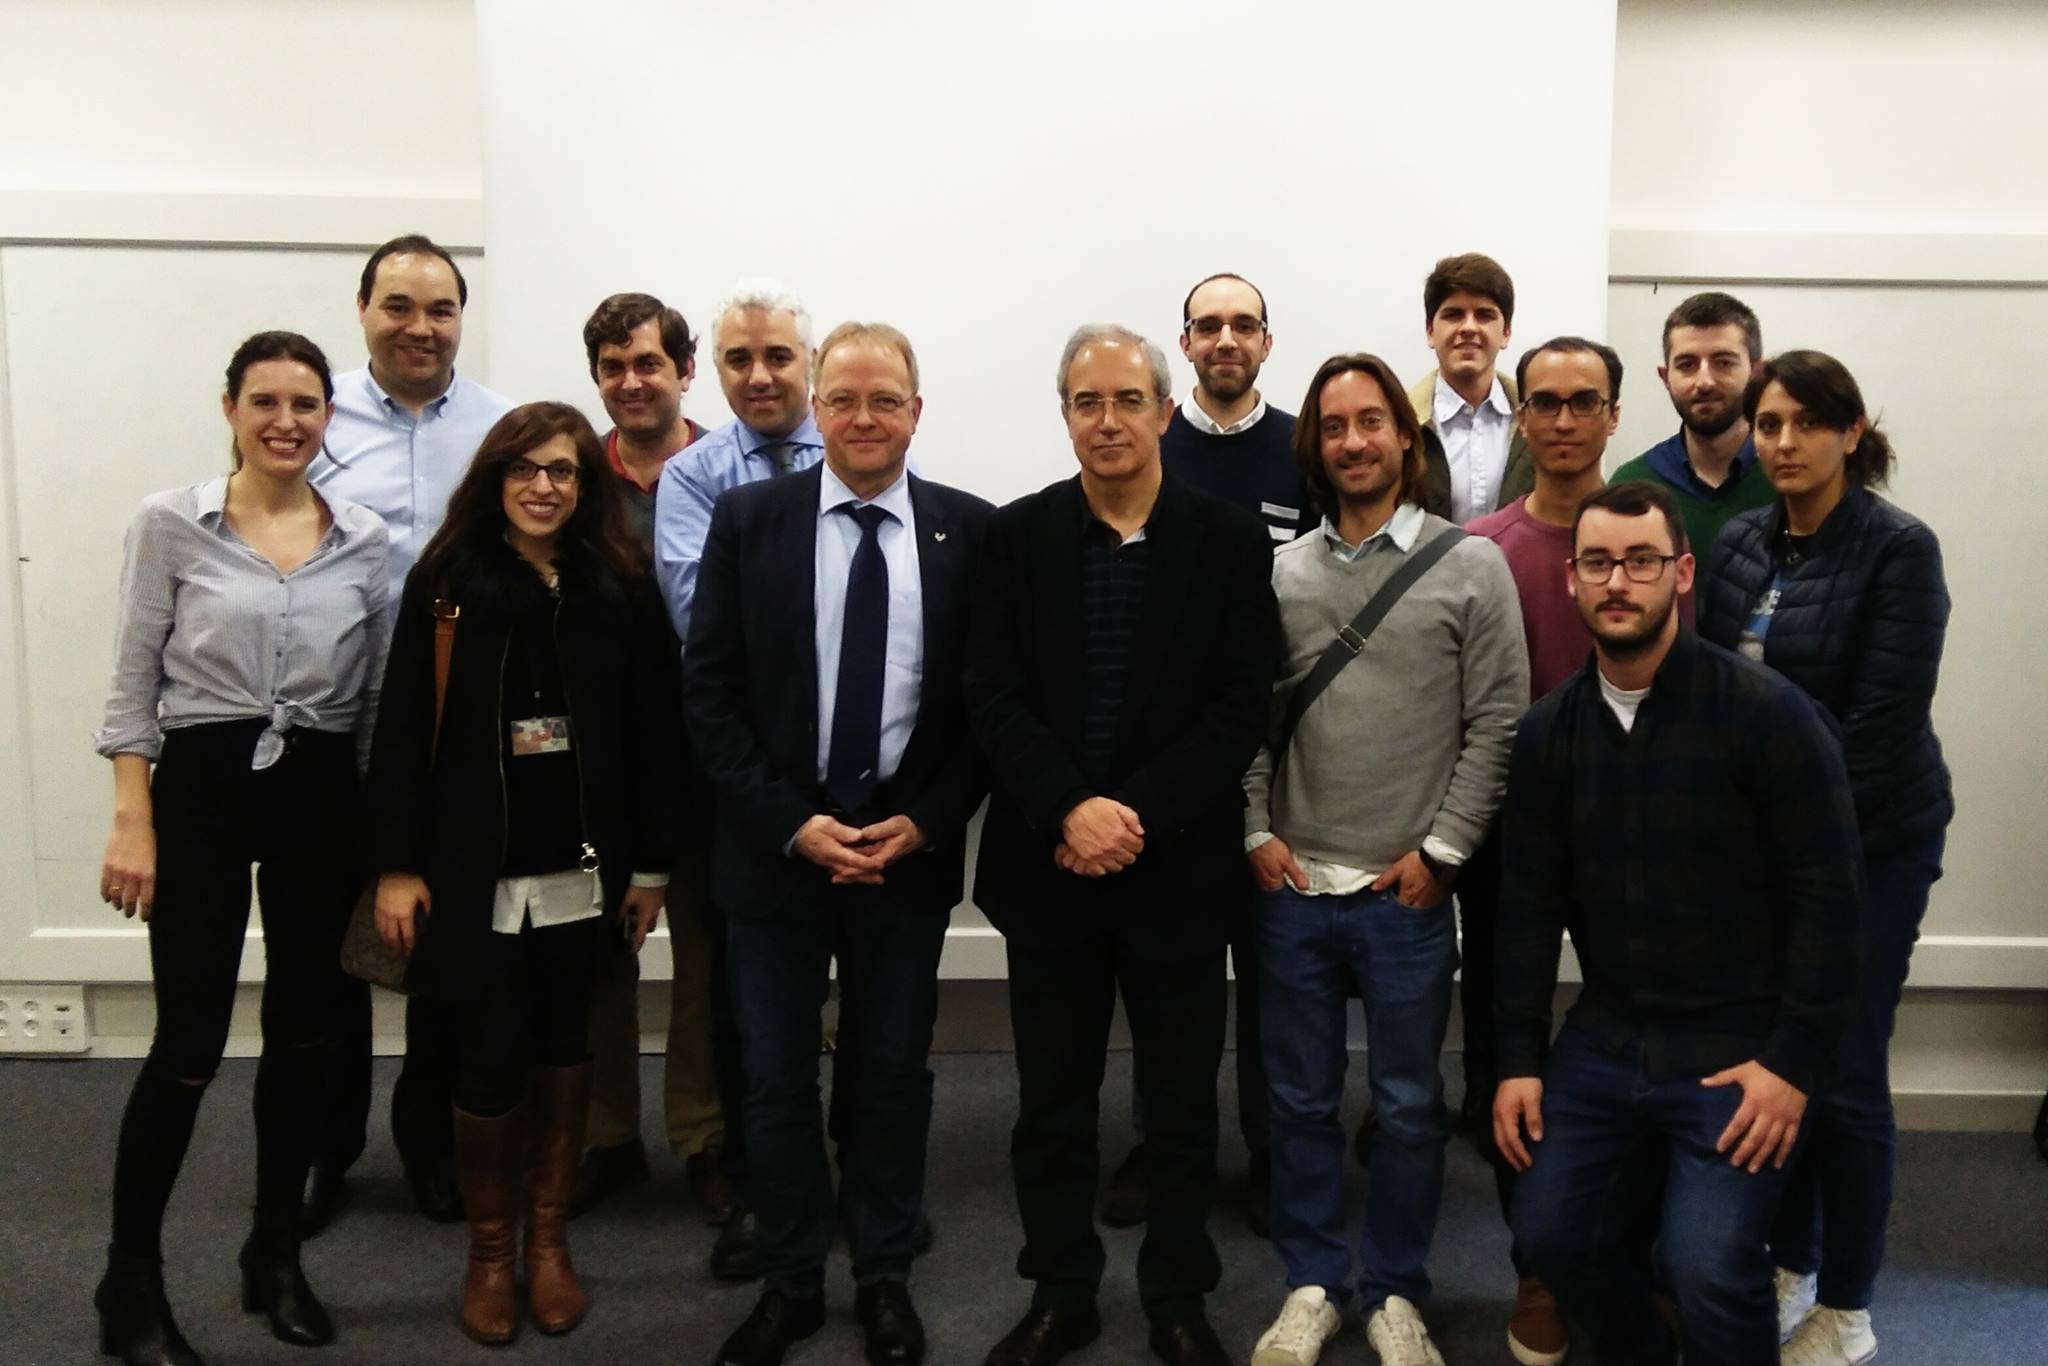 Presentation of the IGM – RWTH – COMPMECH RESEARCH GROUP